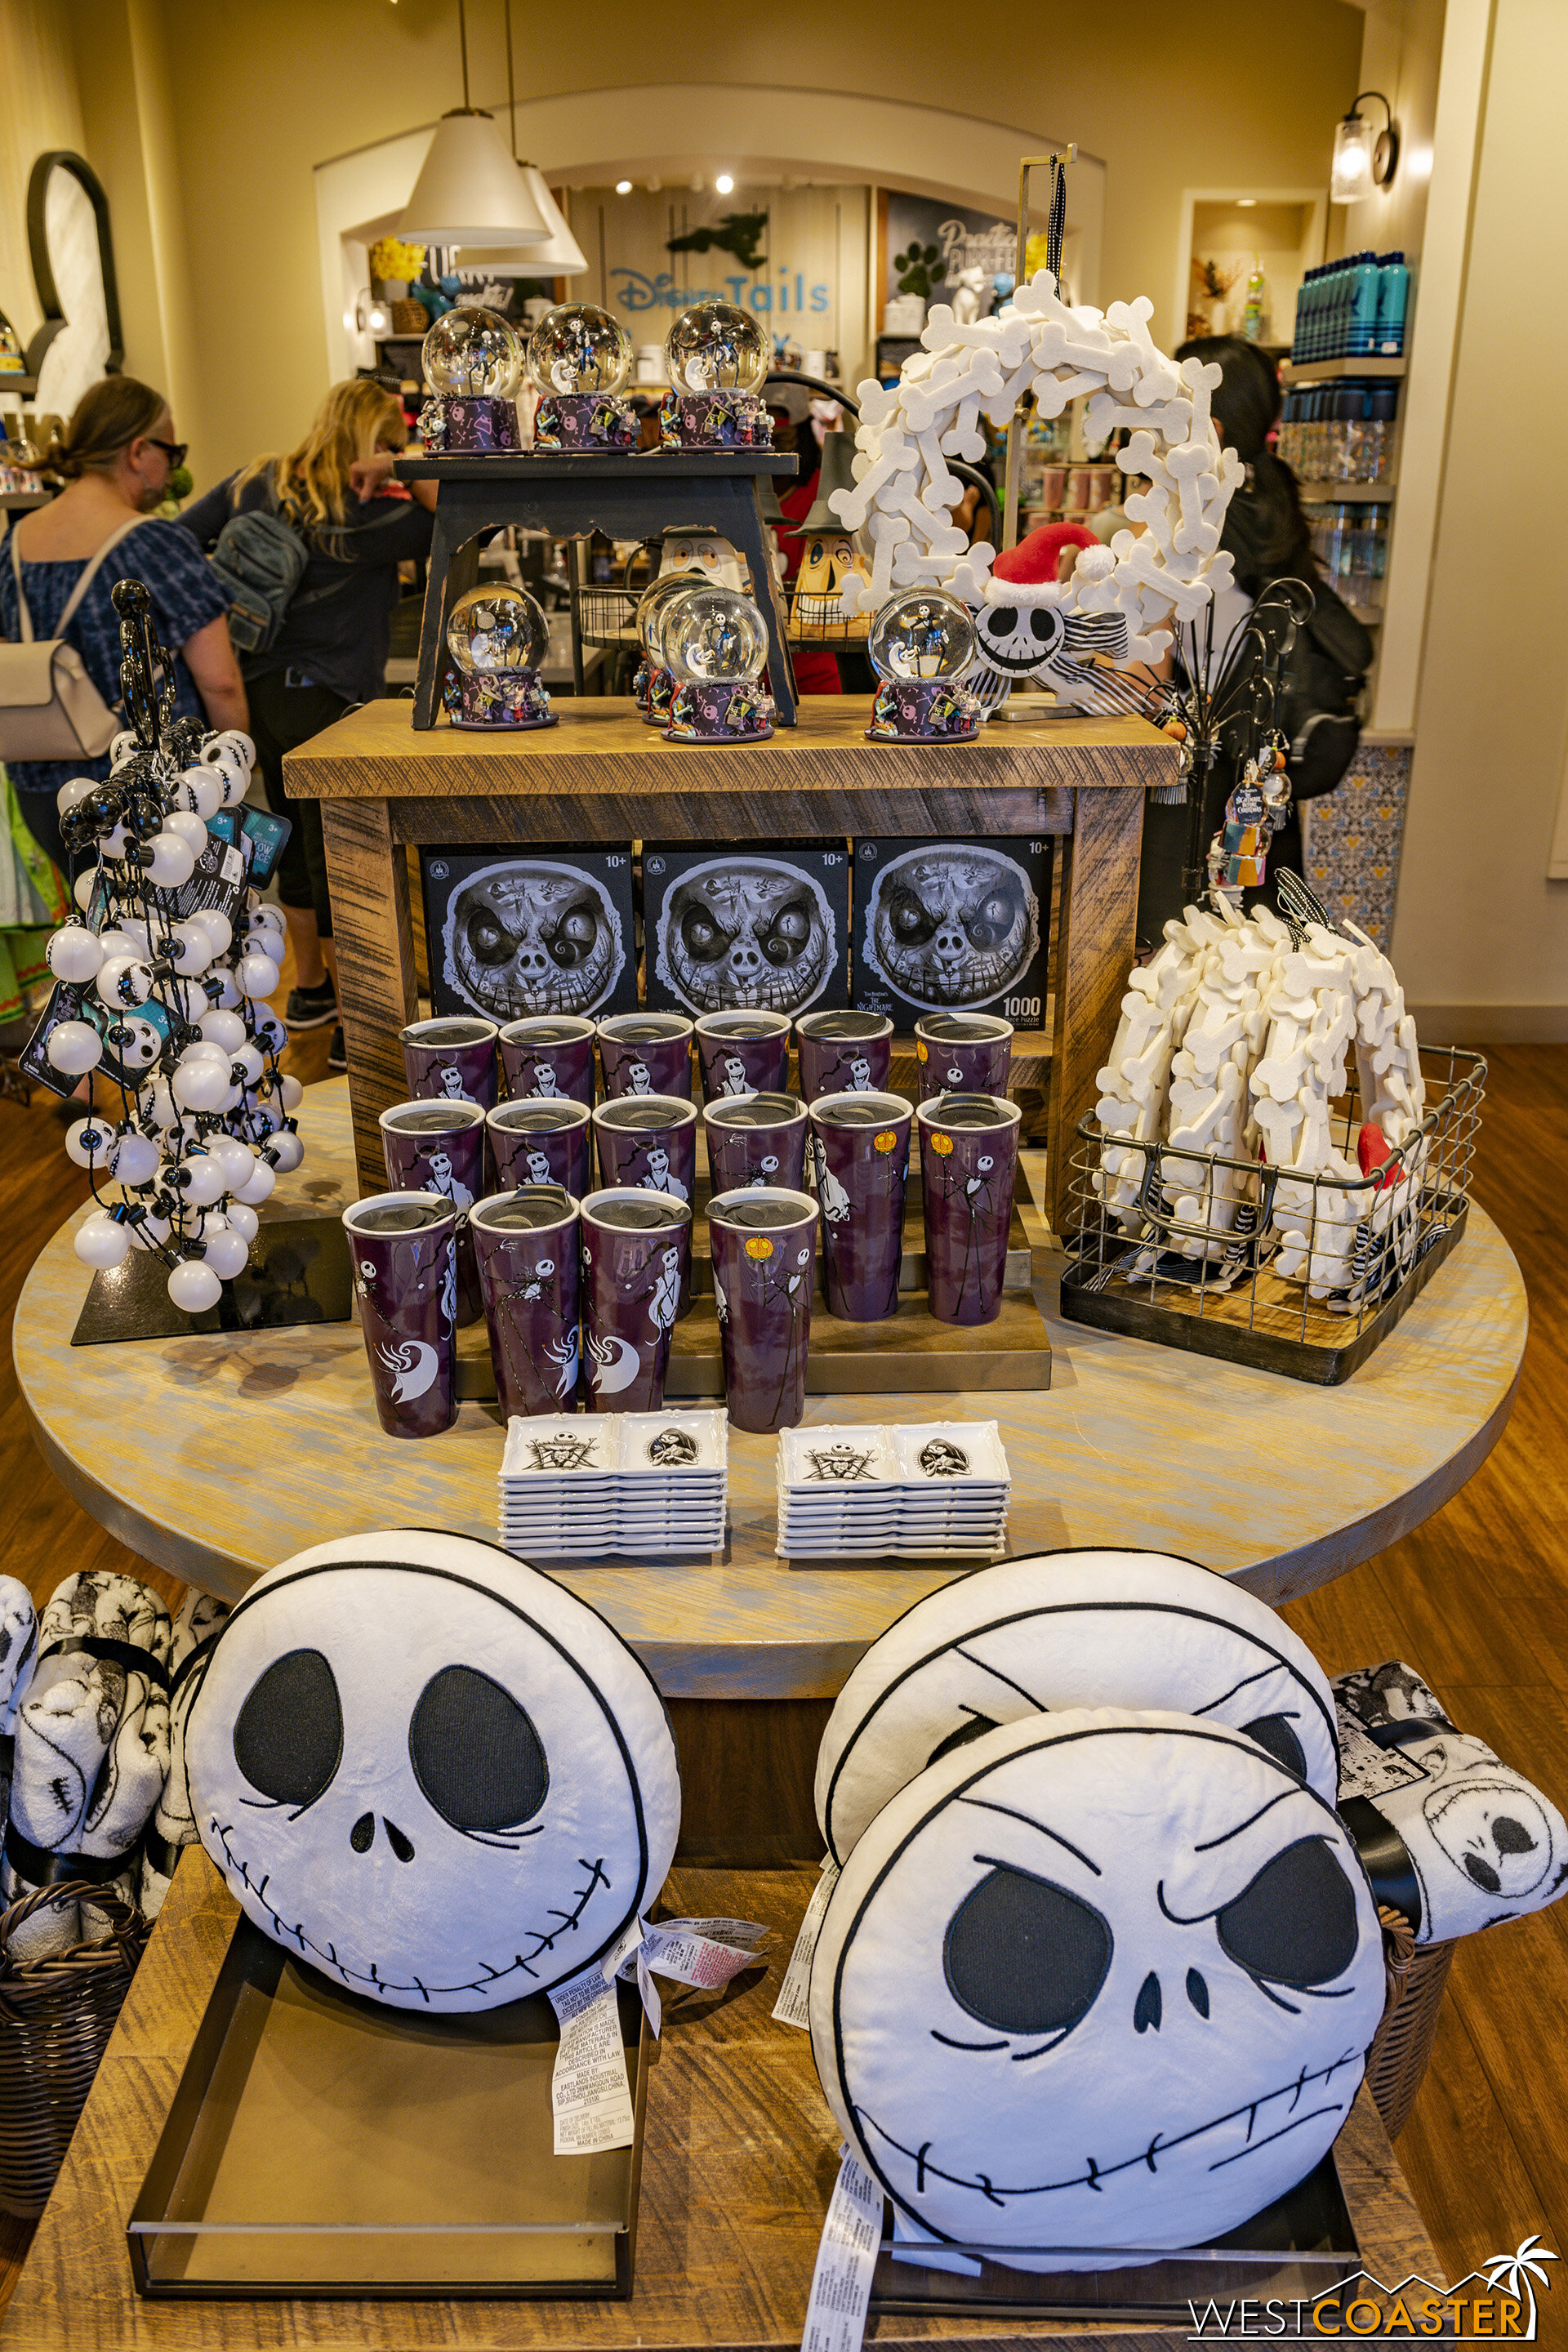  The next space over, there were Nightmare Before Christmas goods for sale too. 